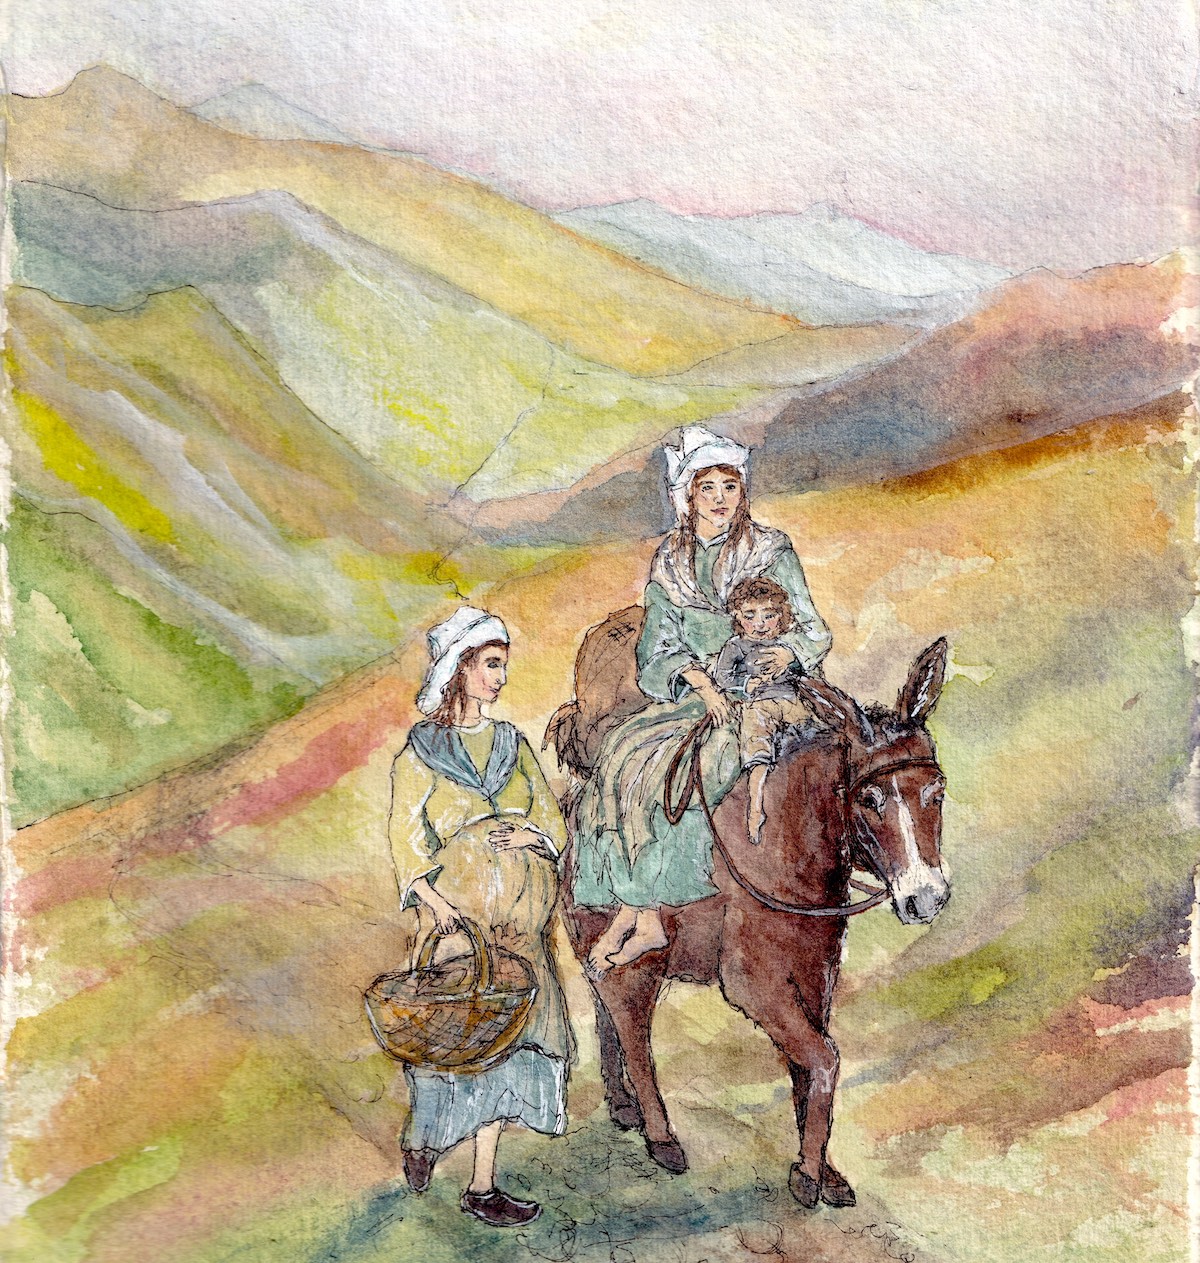 A watercolour painting of a pregnant women holding a basket walking beside a donkey which carries another woman and a toddler. Both are dressed in Napoleonic era clothing and are travelling through the mountains